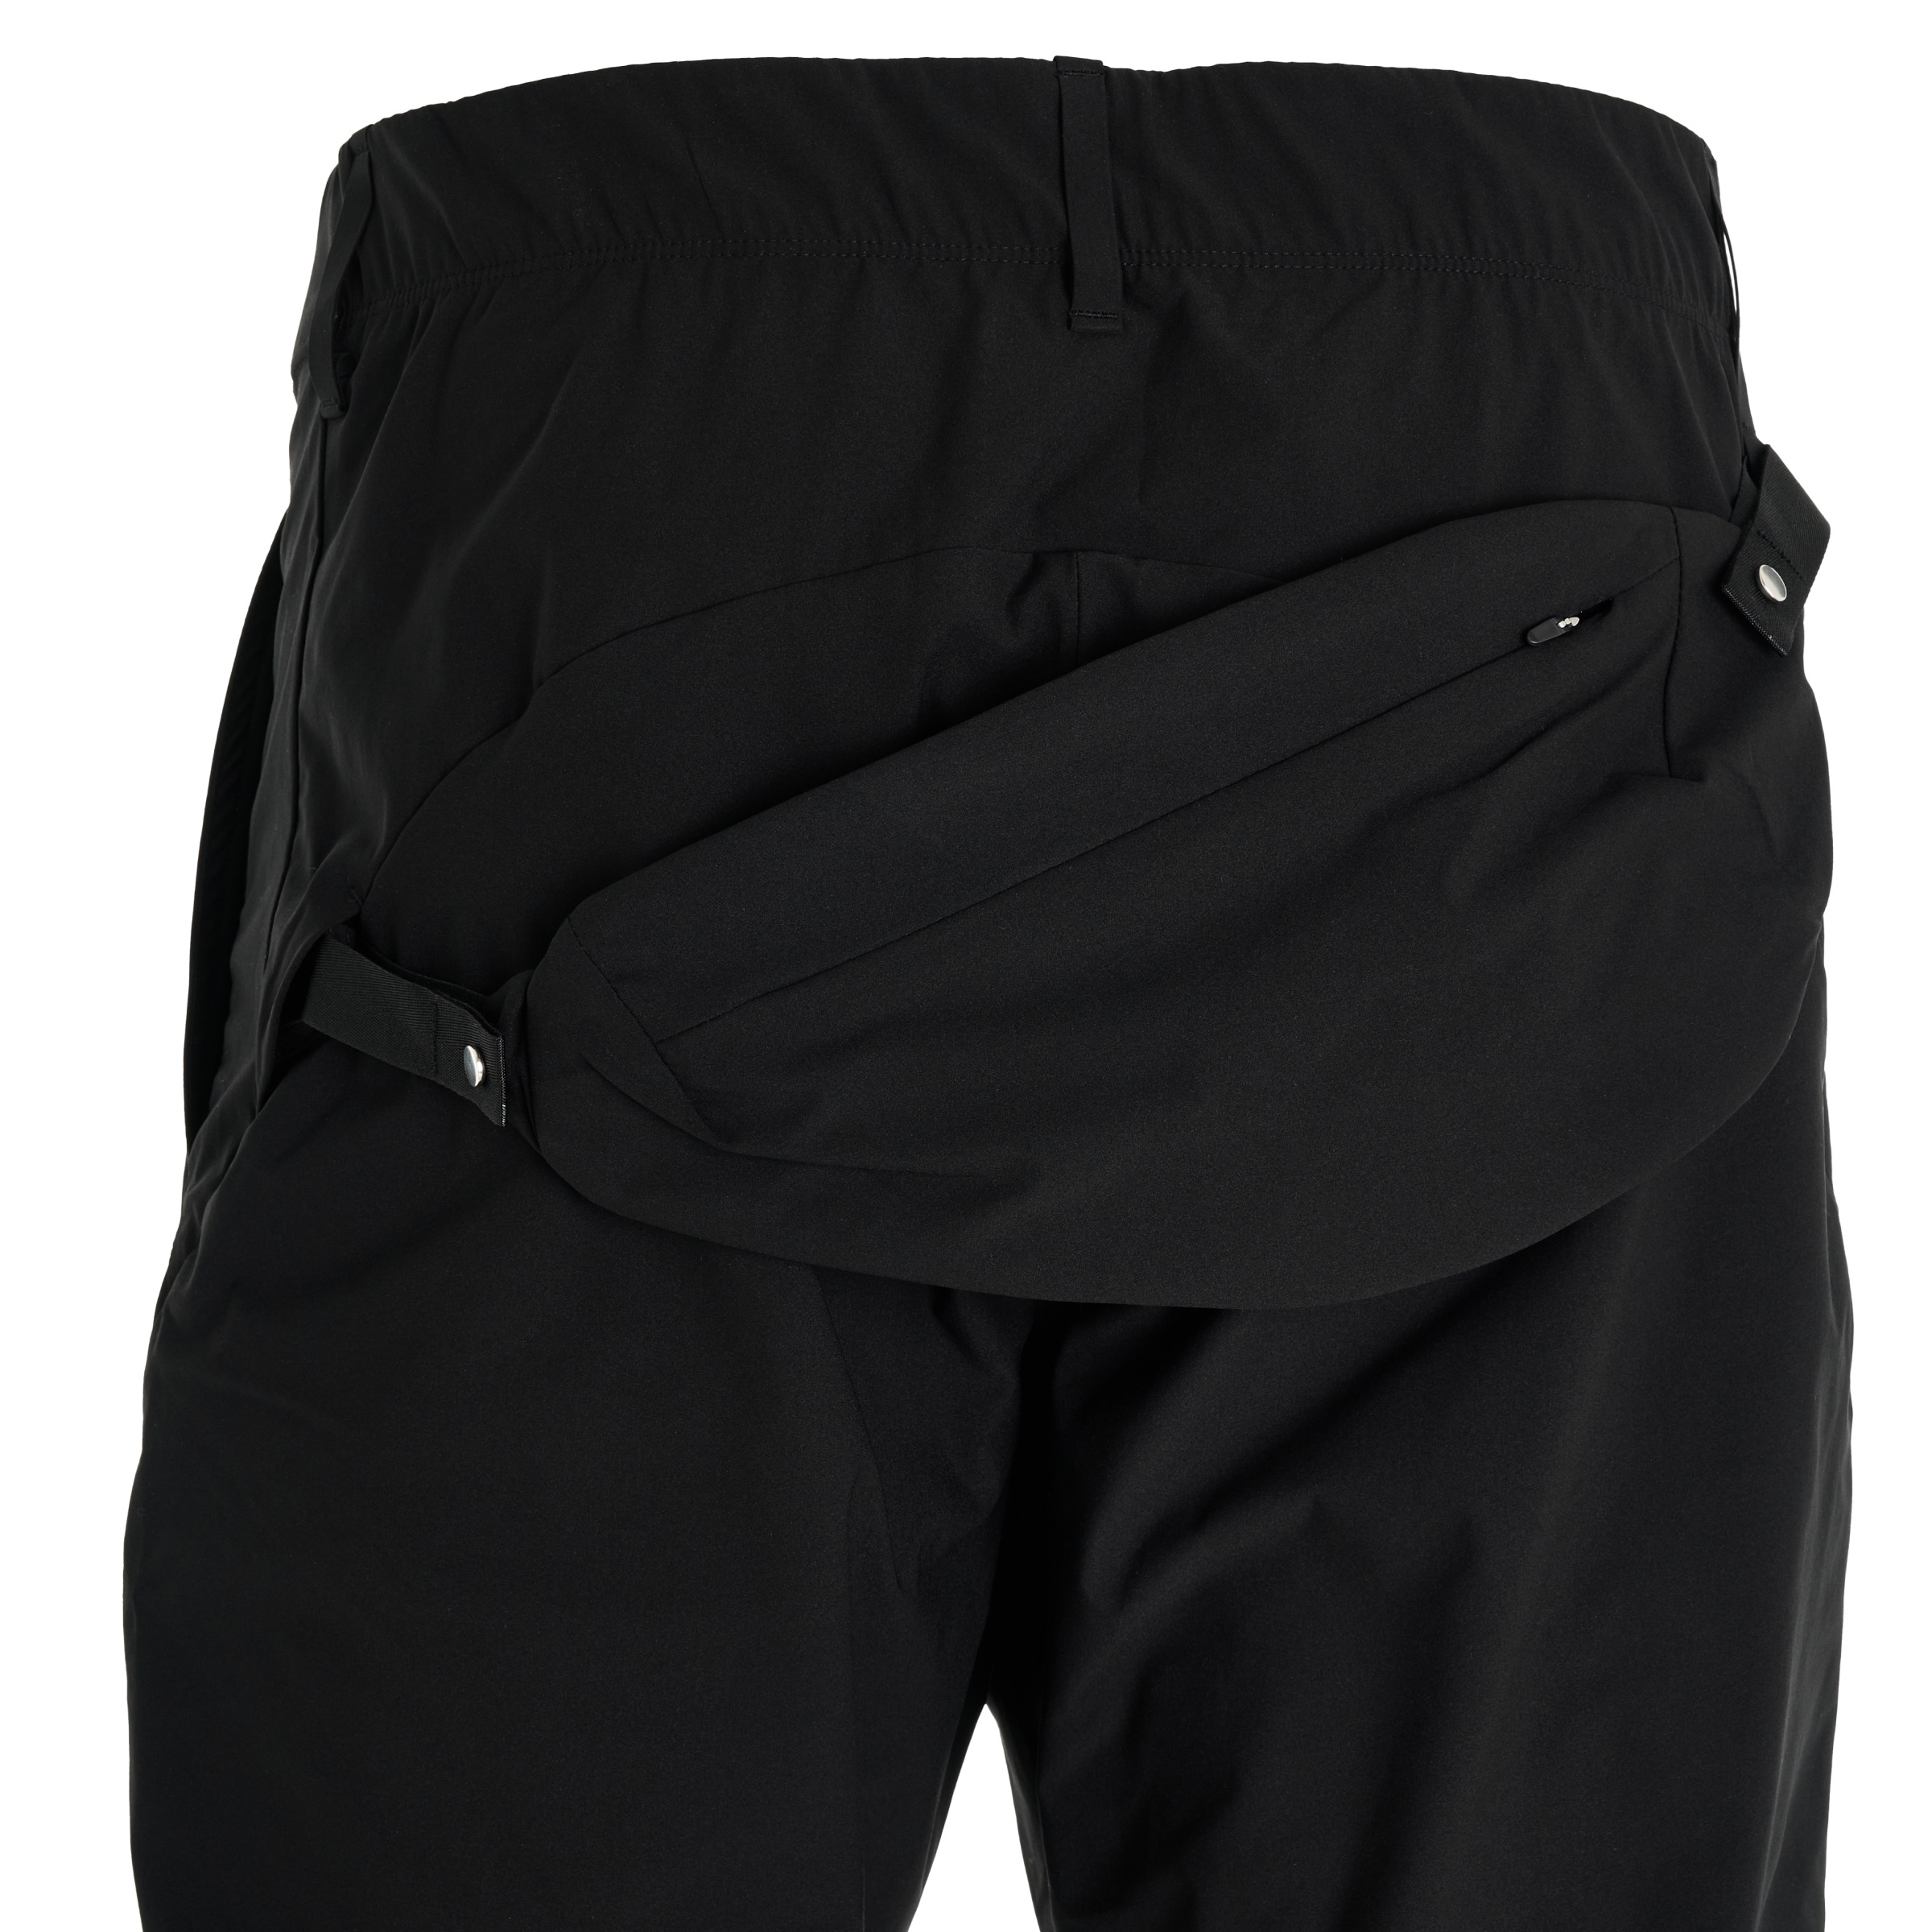 6.0 Technical Pants (Right) in Black - 5